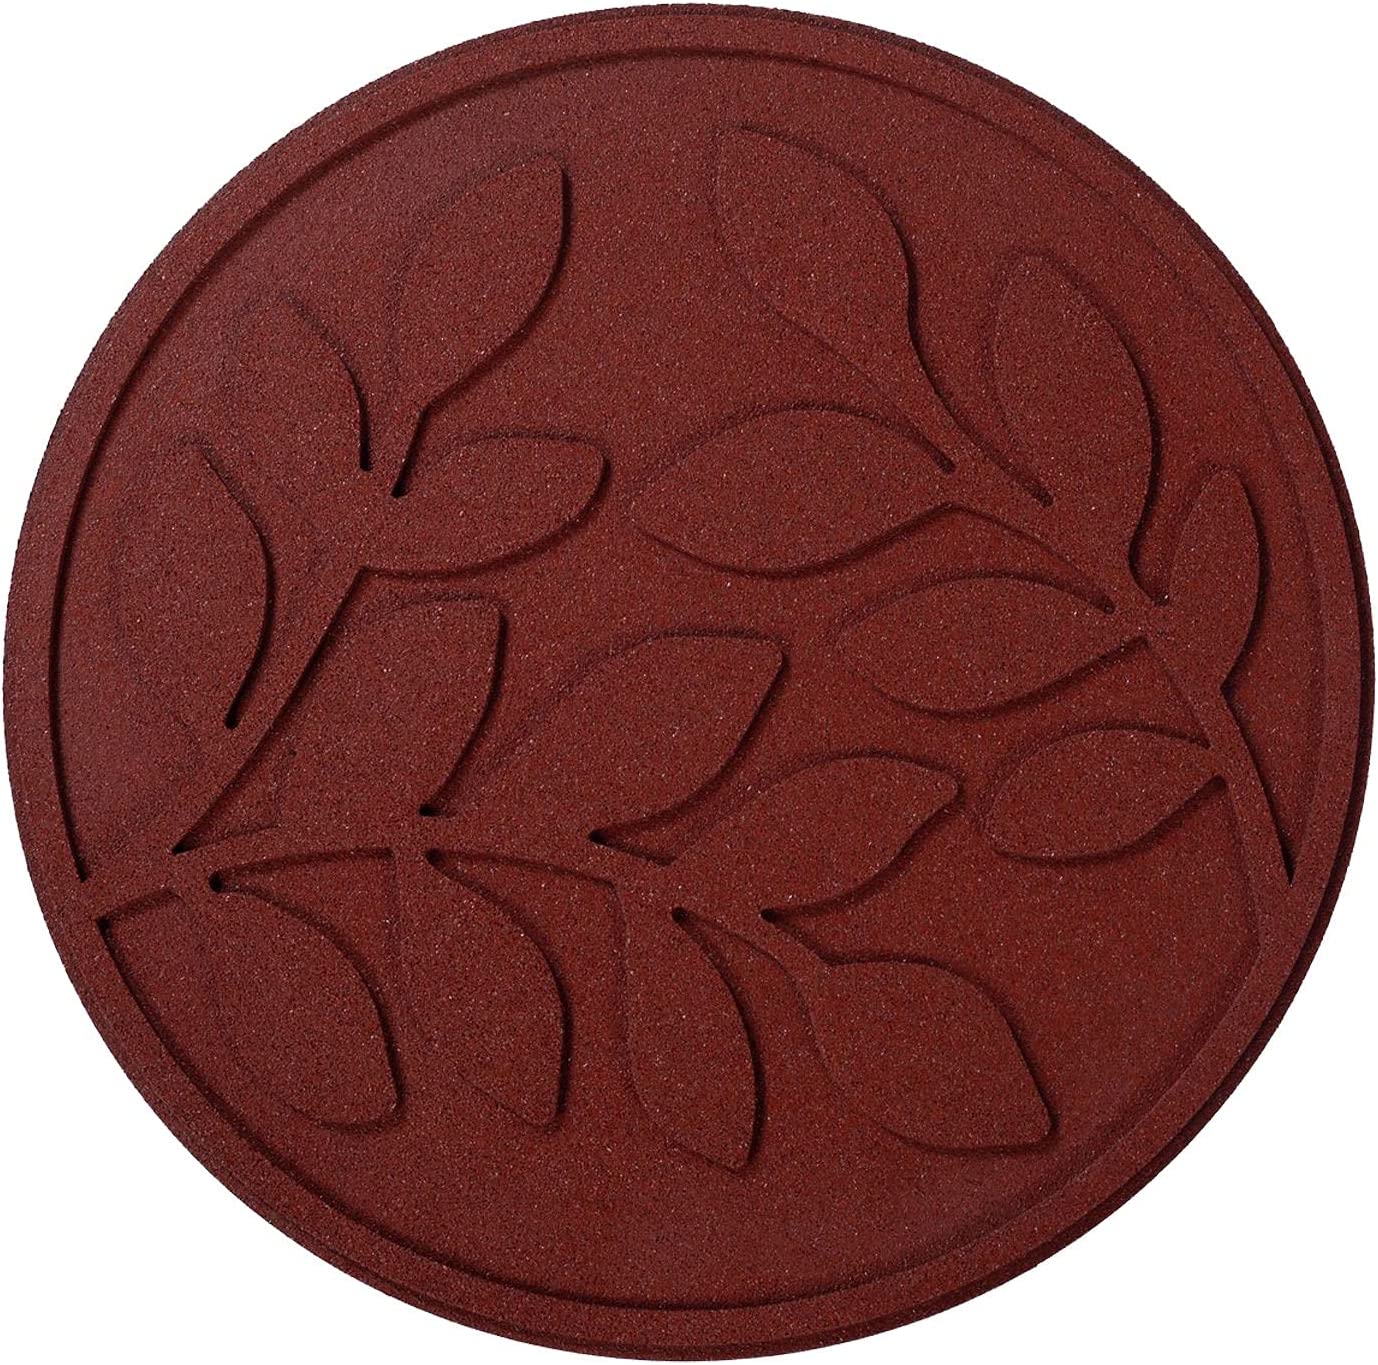 Nicoman garden eco friendly stepping stones made from recycled rubber